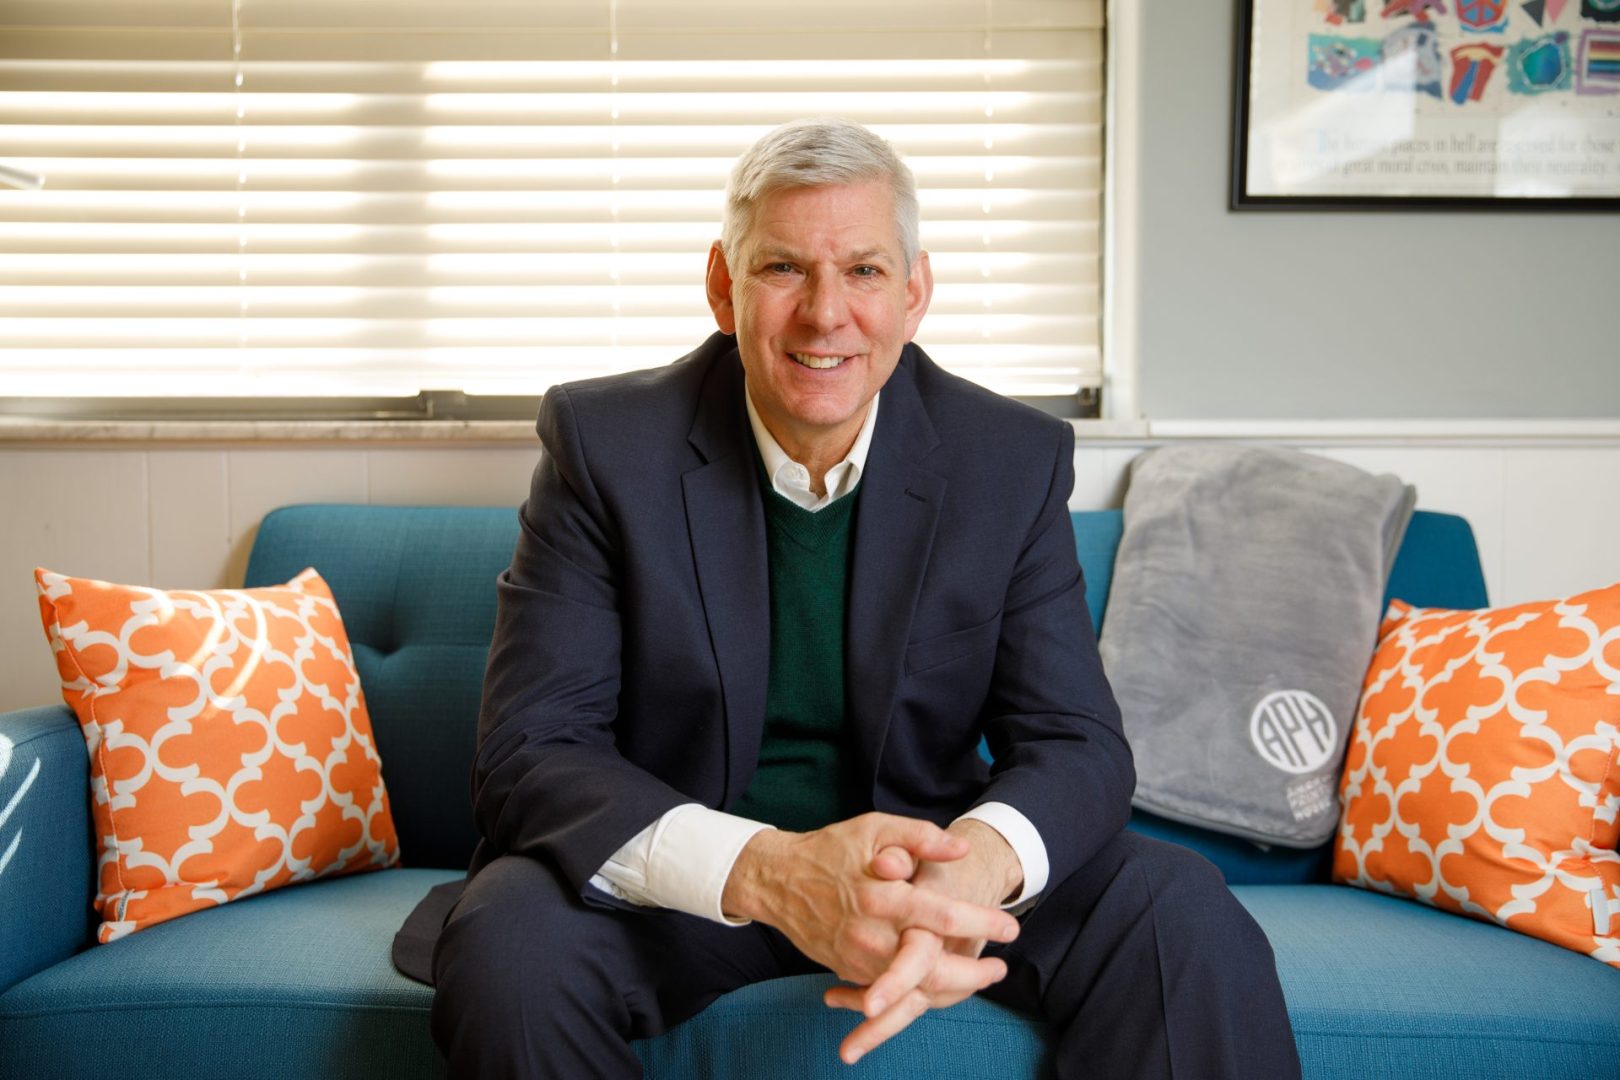 Craig Meador smiles as he leans forward to rest his elbows on his legs as he sits on a teal couch decorated with an APH branded blanket and orange throw pillows.